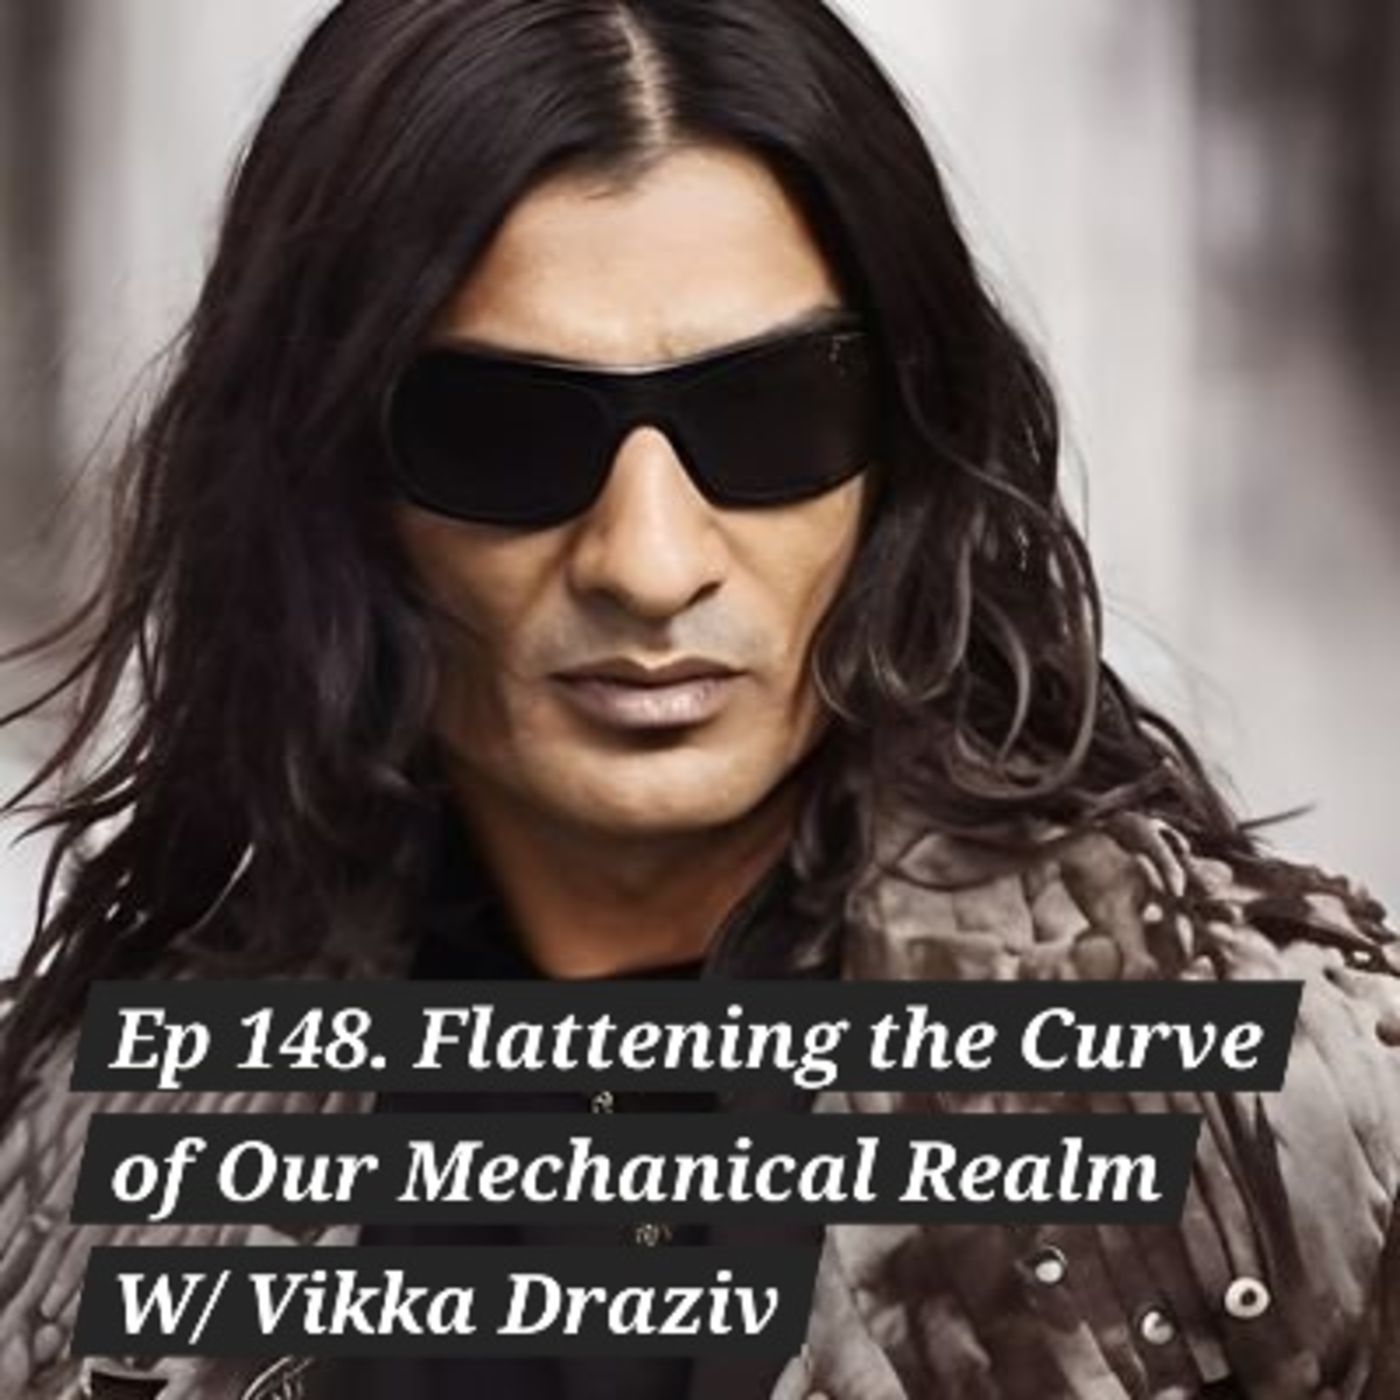 Ep 148. Flattening the Curve of Our Mechanical Realm W/ Vikka Draziv